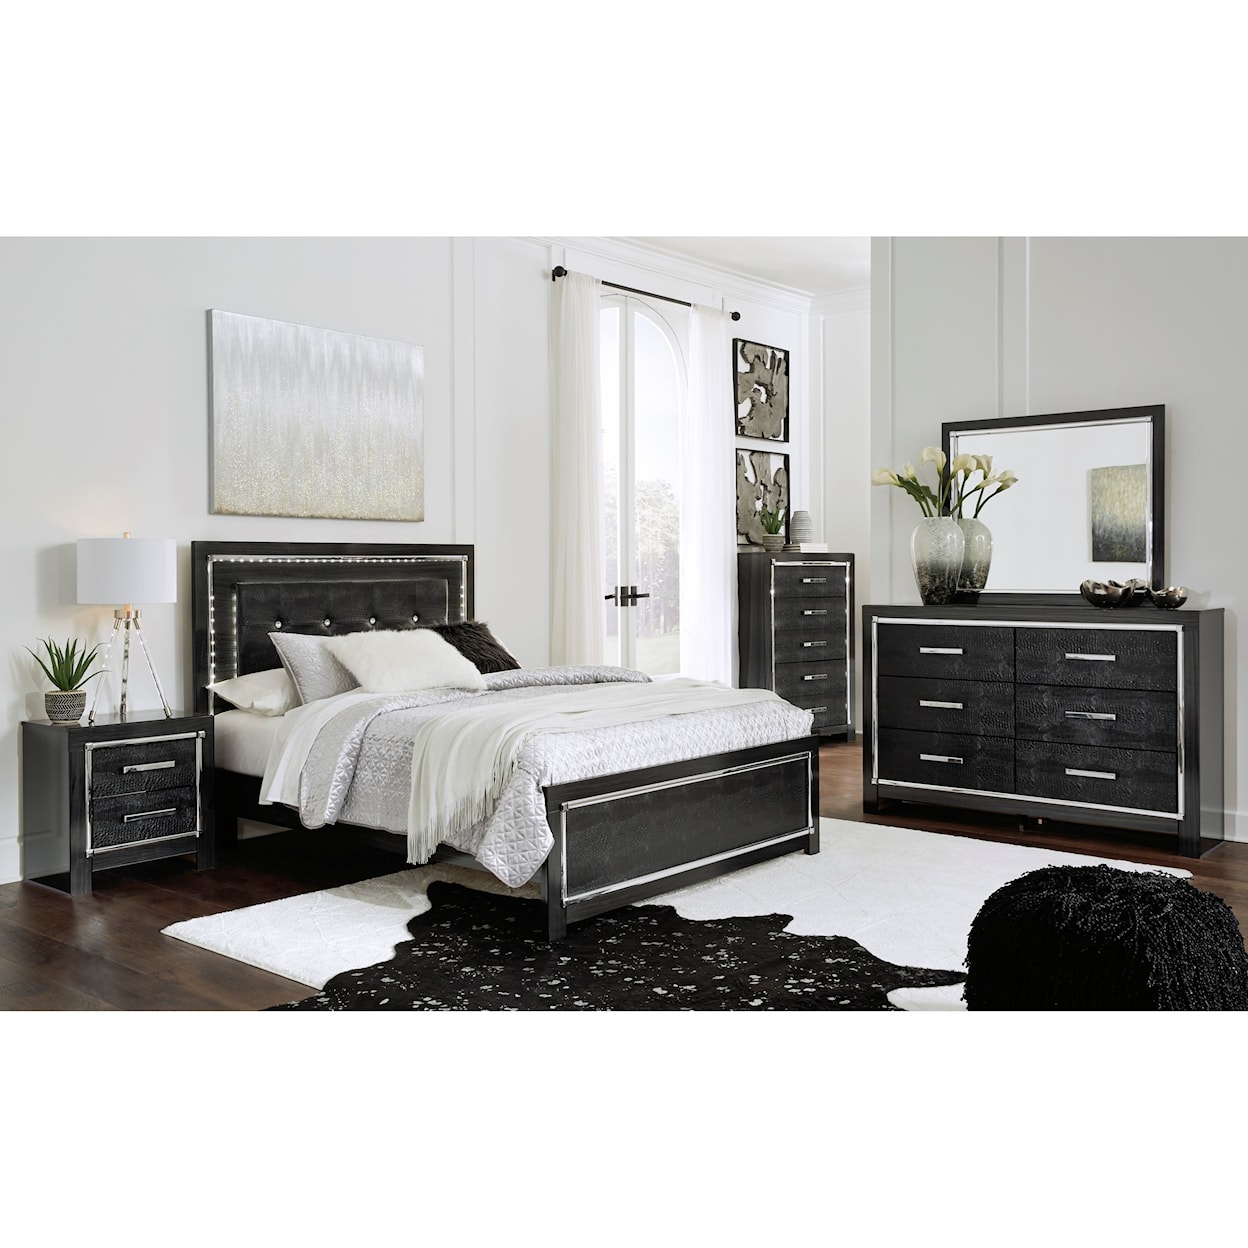 Signature Design by Ashley Furniture Kaydell Queen Bedroom Group